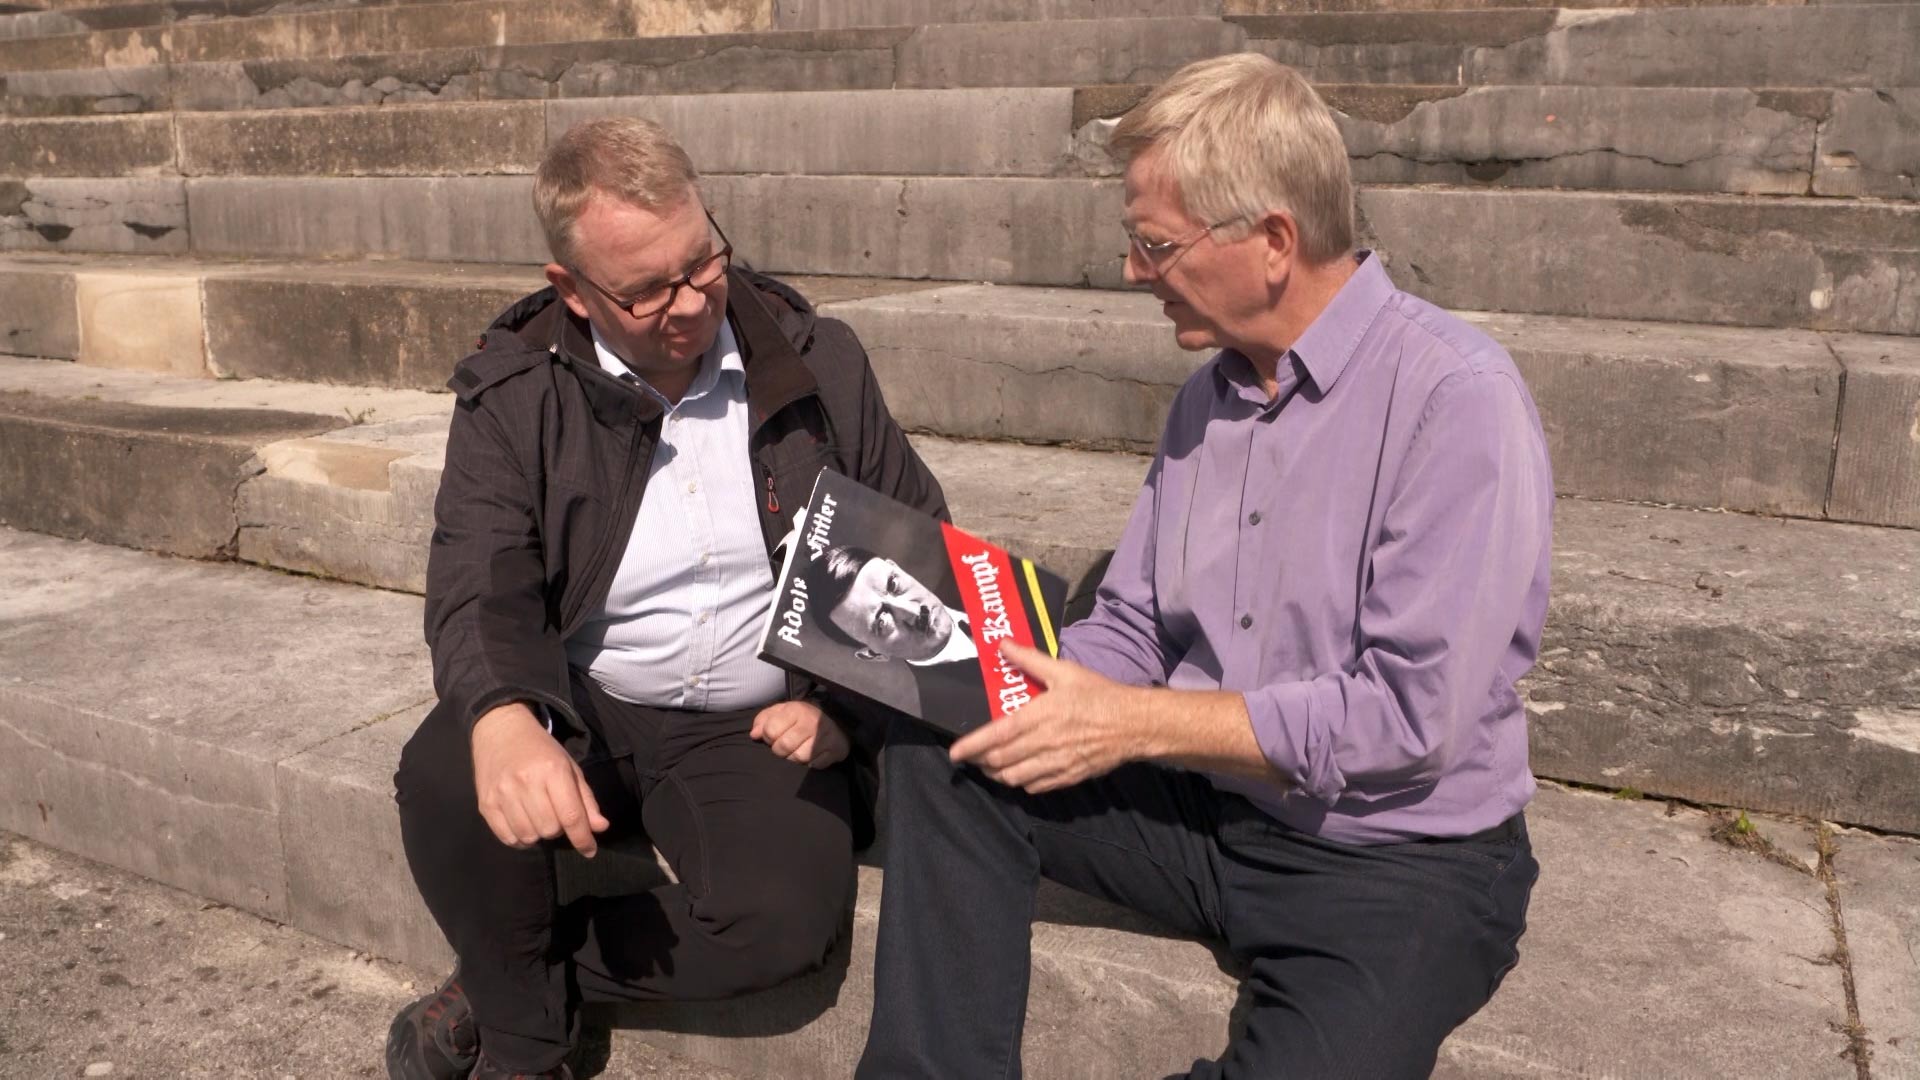 Rick Steves Special: The Story of Fascism in Europe